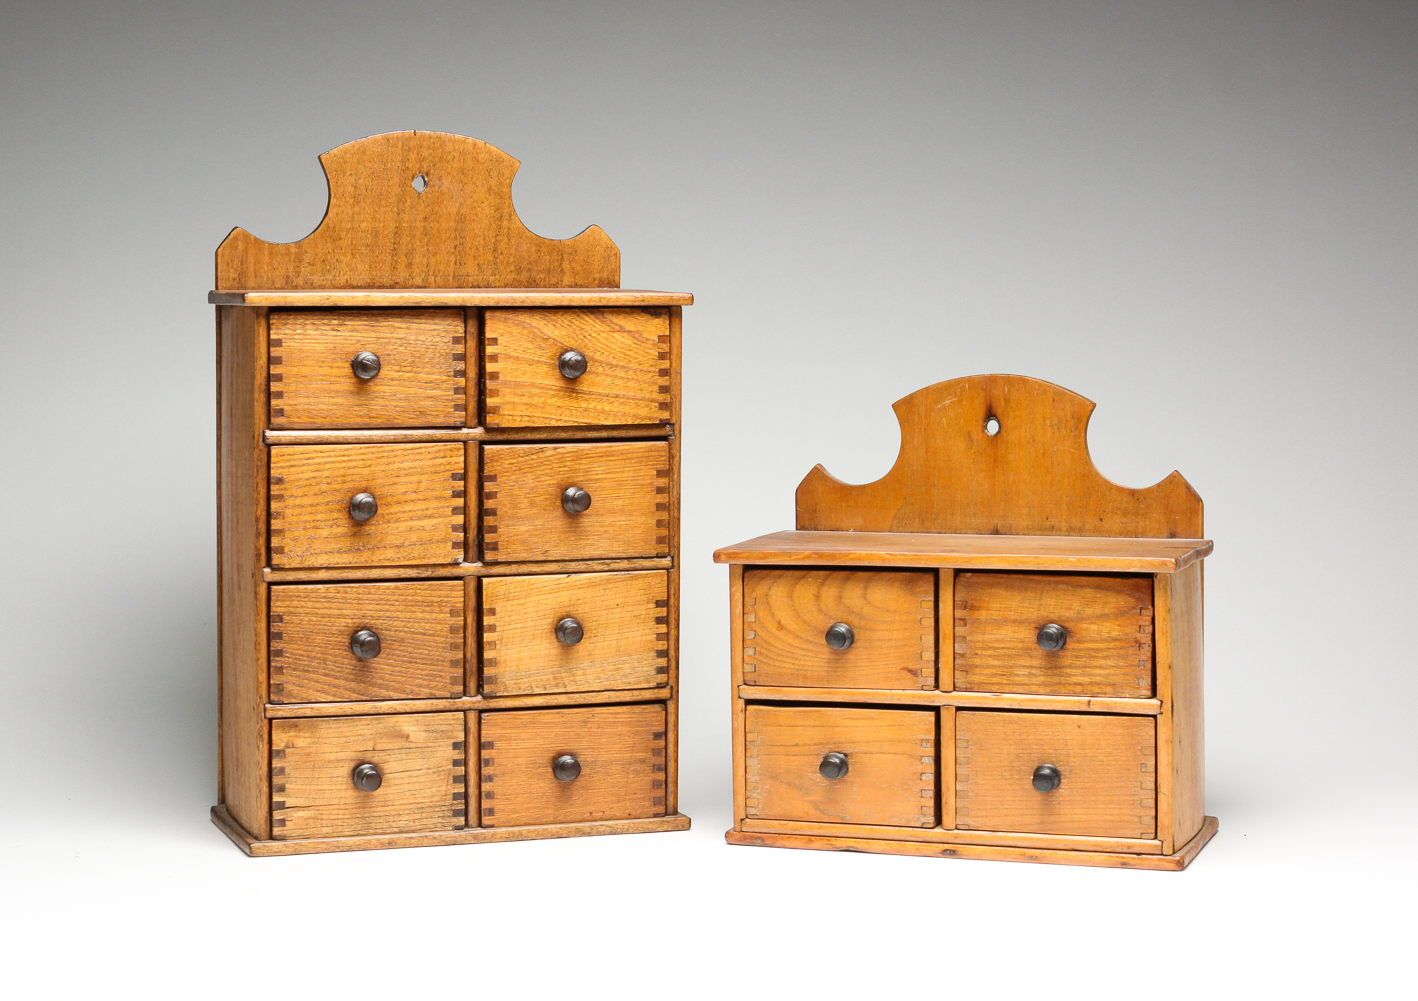 TWO AMERICAN HANGING SPICE BOXES  2e0278